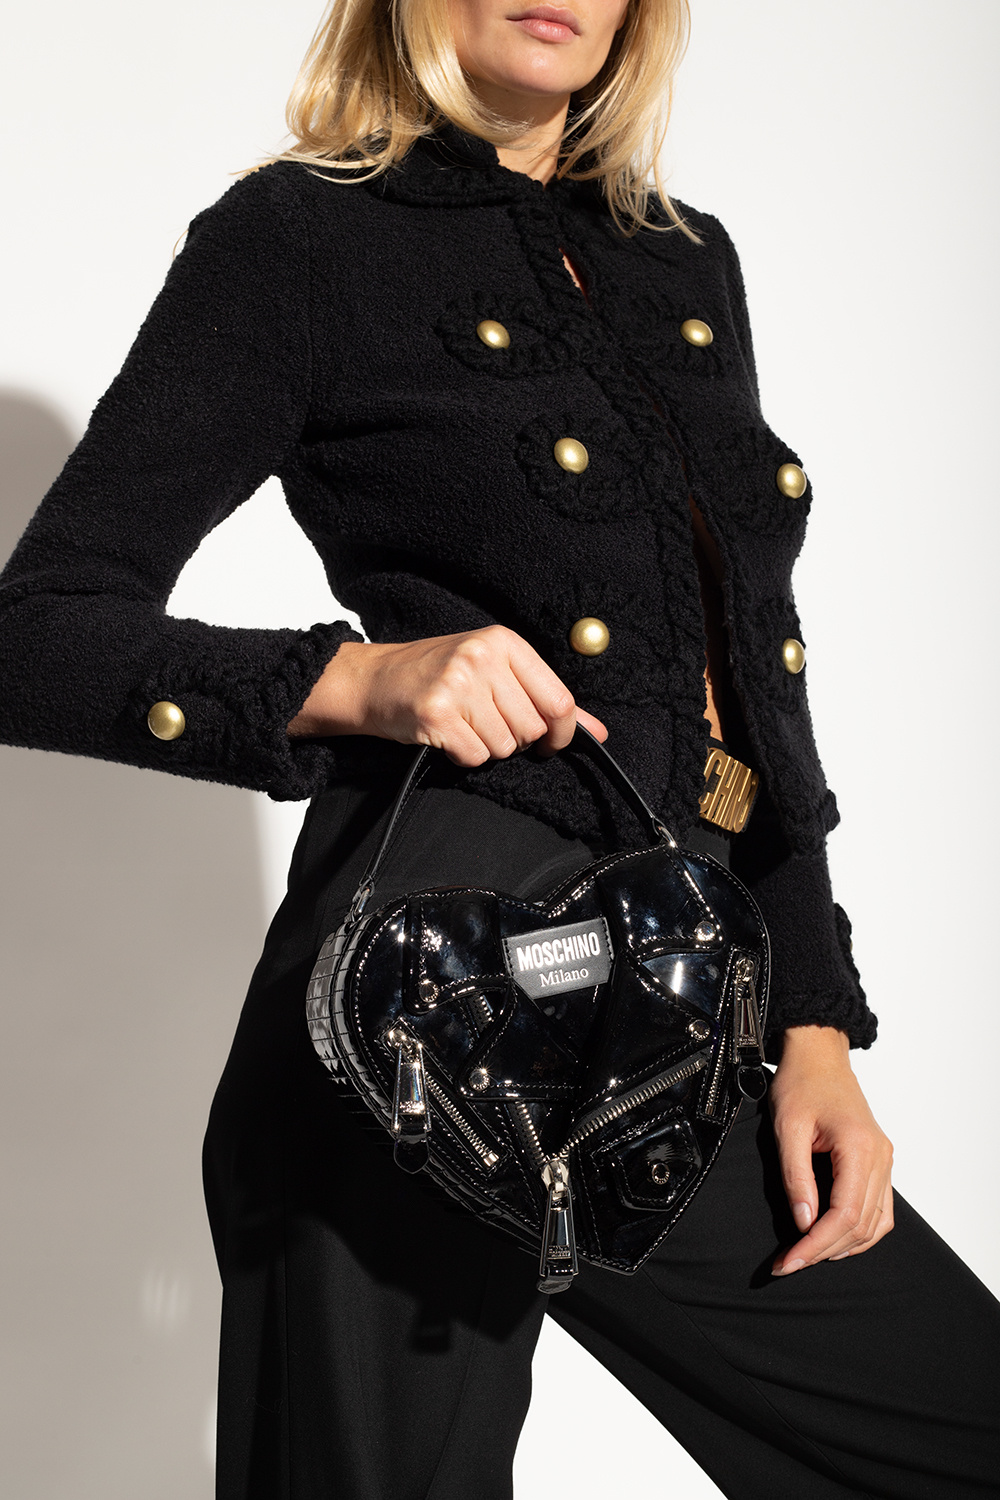 Moschino Leather heart-shaped bag